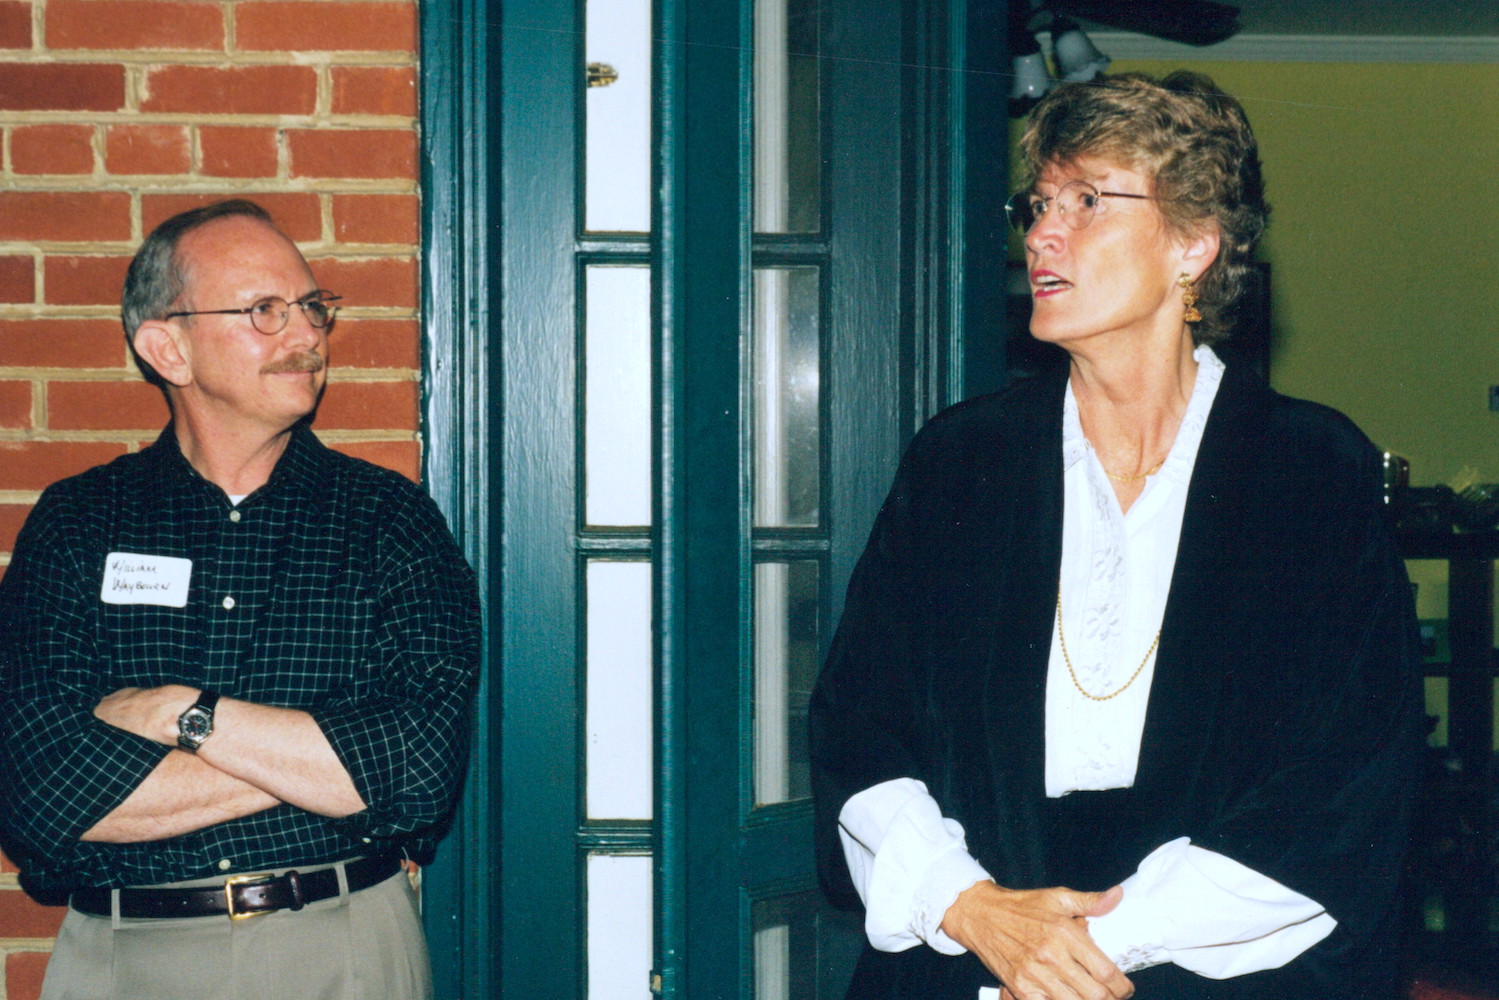 William Waybourn and Colonel Grethe Cammermeyer raising money for her campaign, Washington, DC, circa 1995. William shares, “I had already left the Victory Fund for GLAAD but wanted to help Grethe's campaign as she had made many appearances on behalf of the Victory Fund after her dismissal from the Army. When her movie 